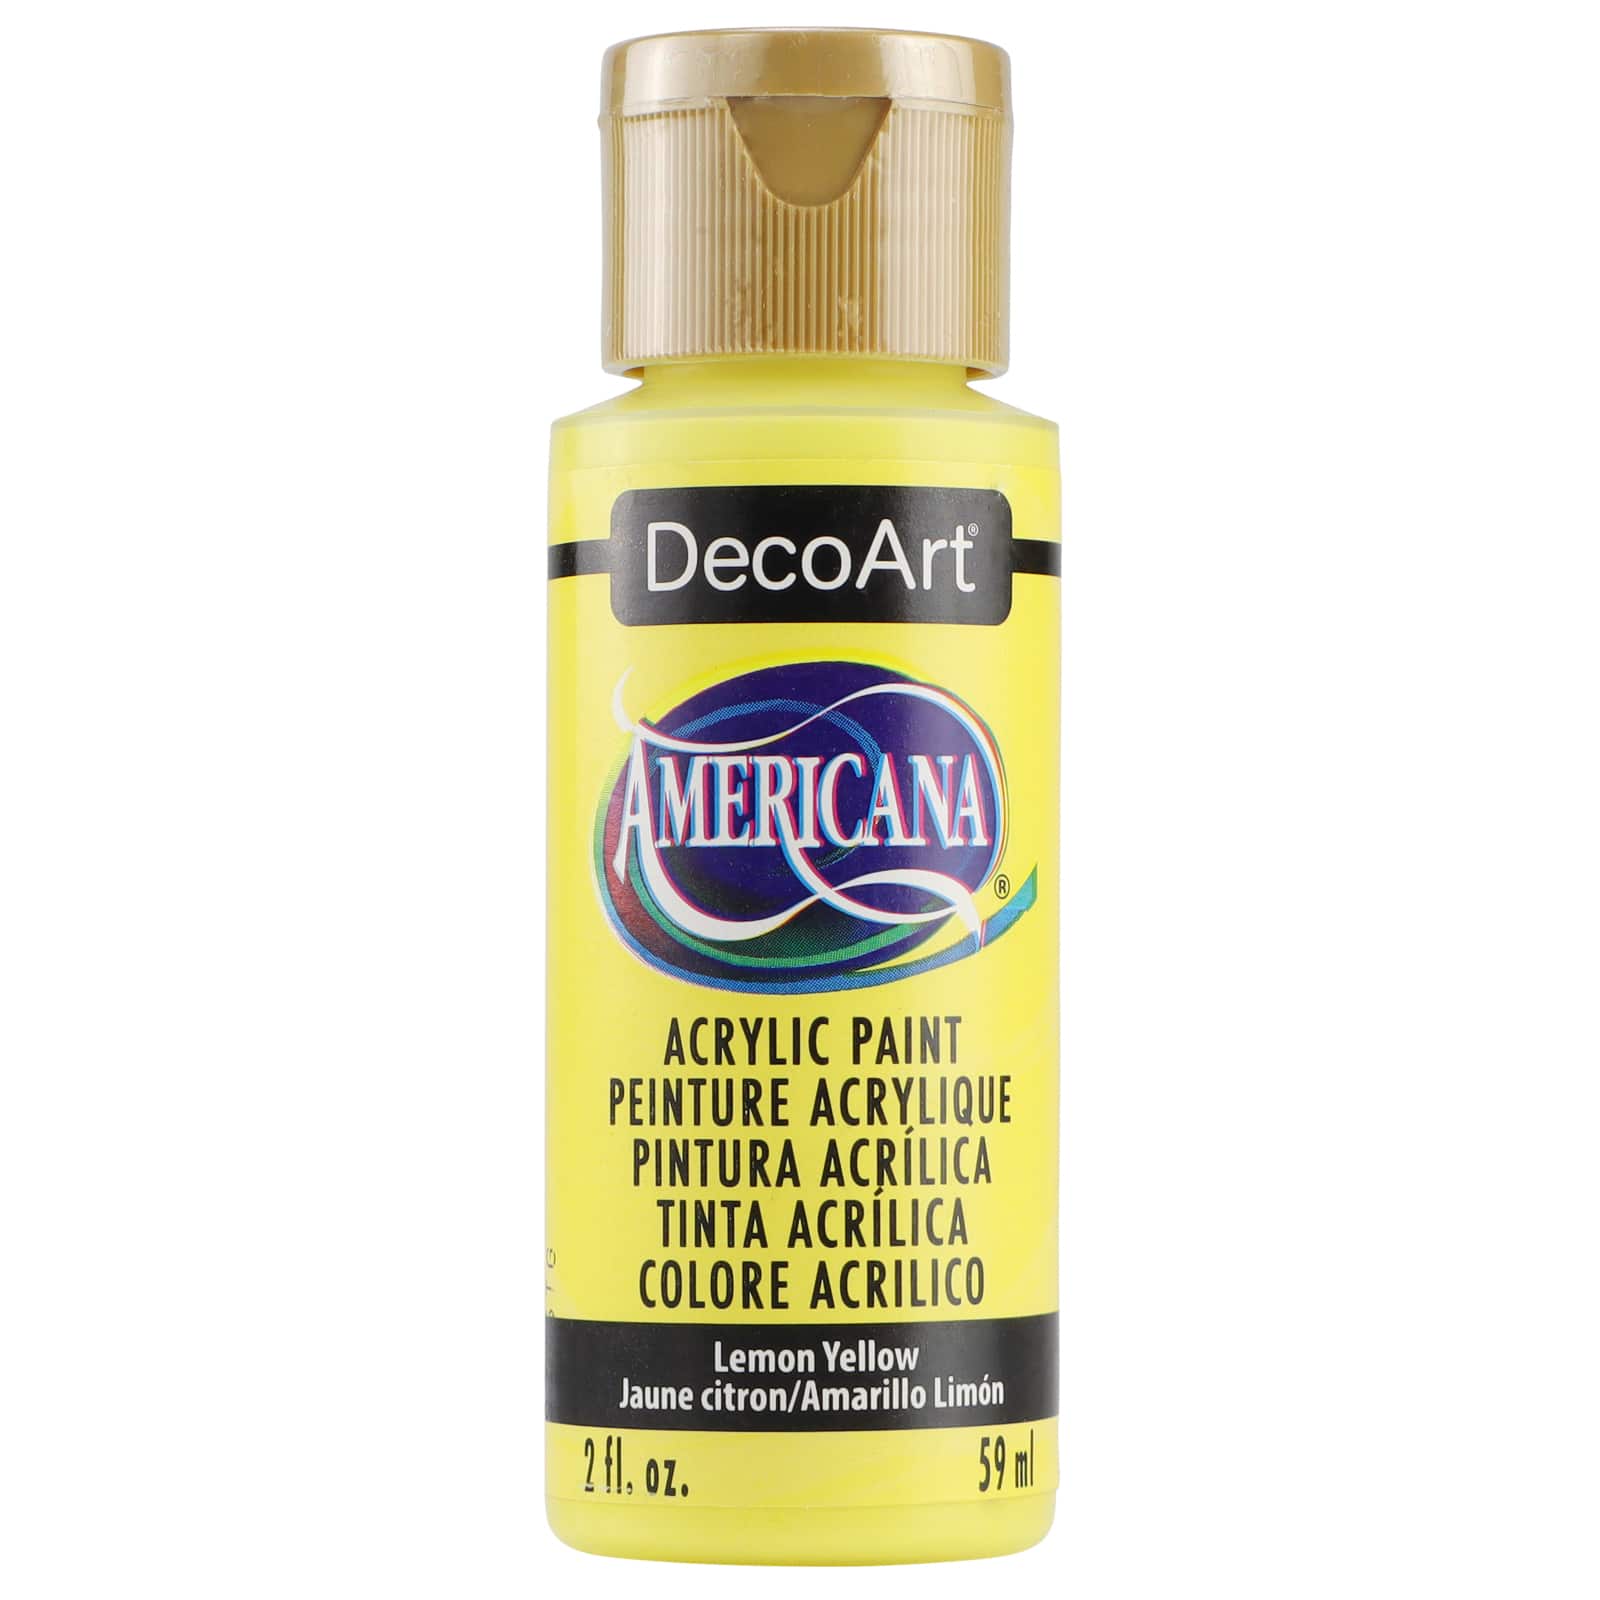 American Acrylic Paint DecoArt paint 59ml suitable for any surface